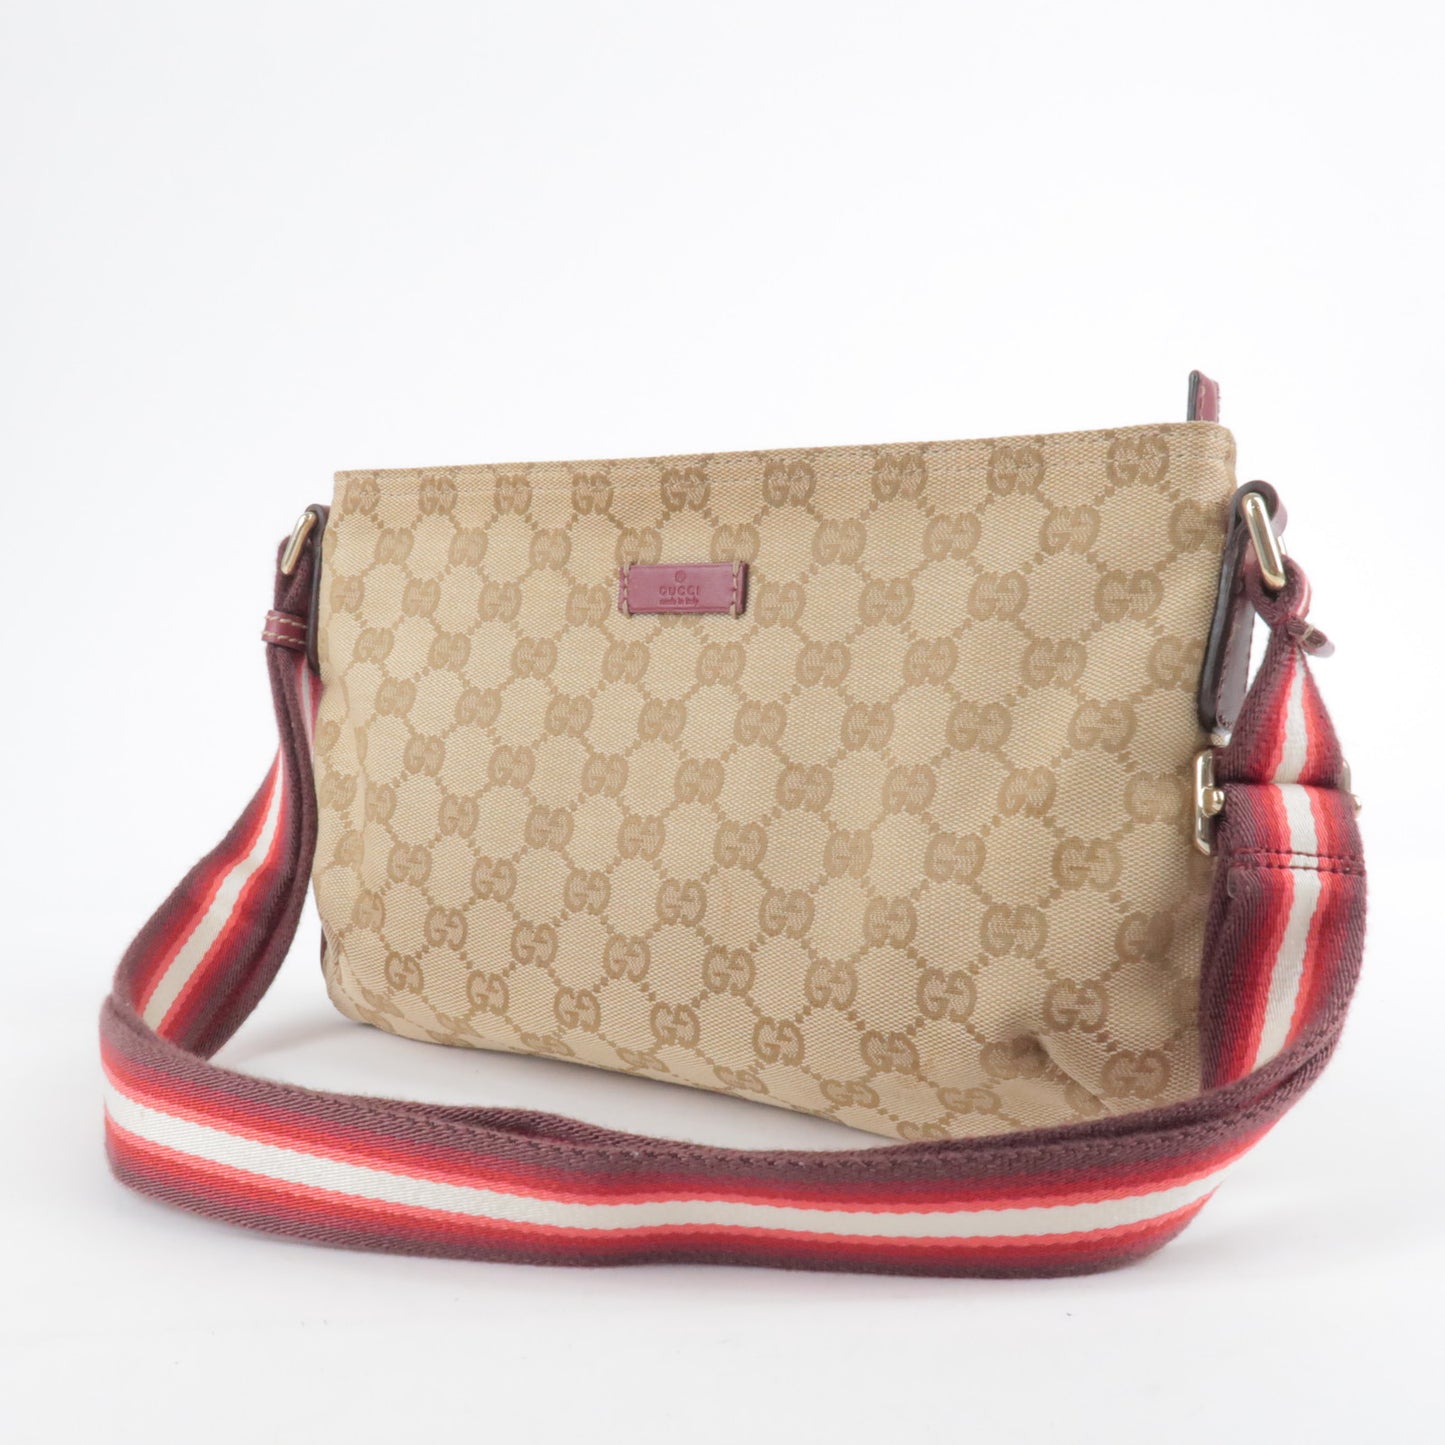 GUCCI Sherry GG Canvas Leather Shoulder Bag Beige Red 189749